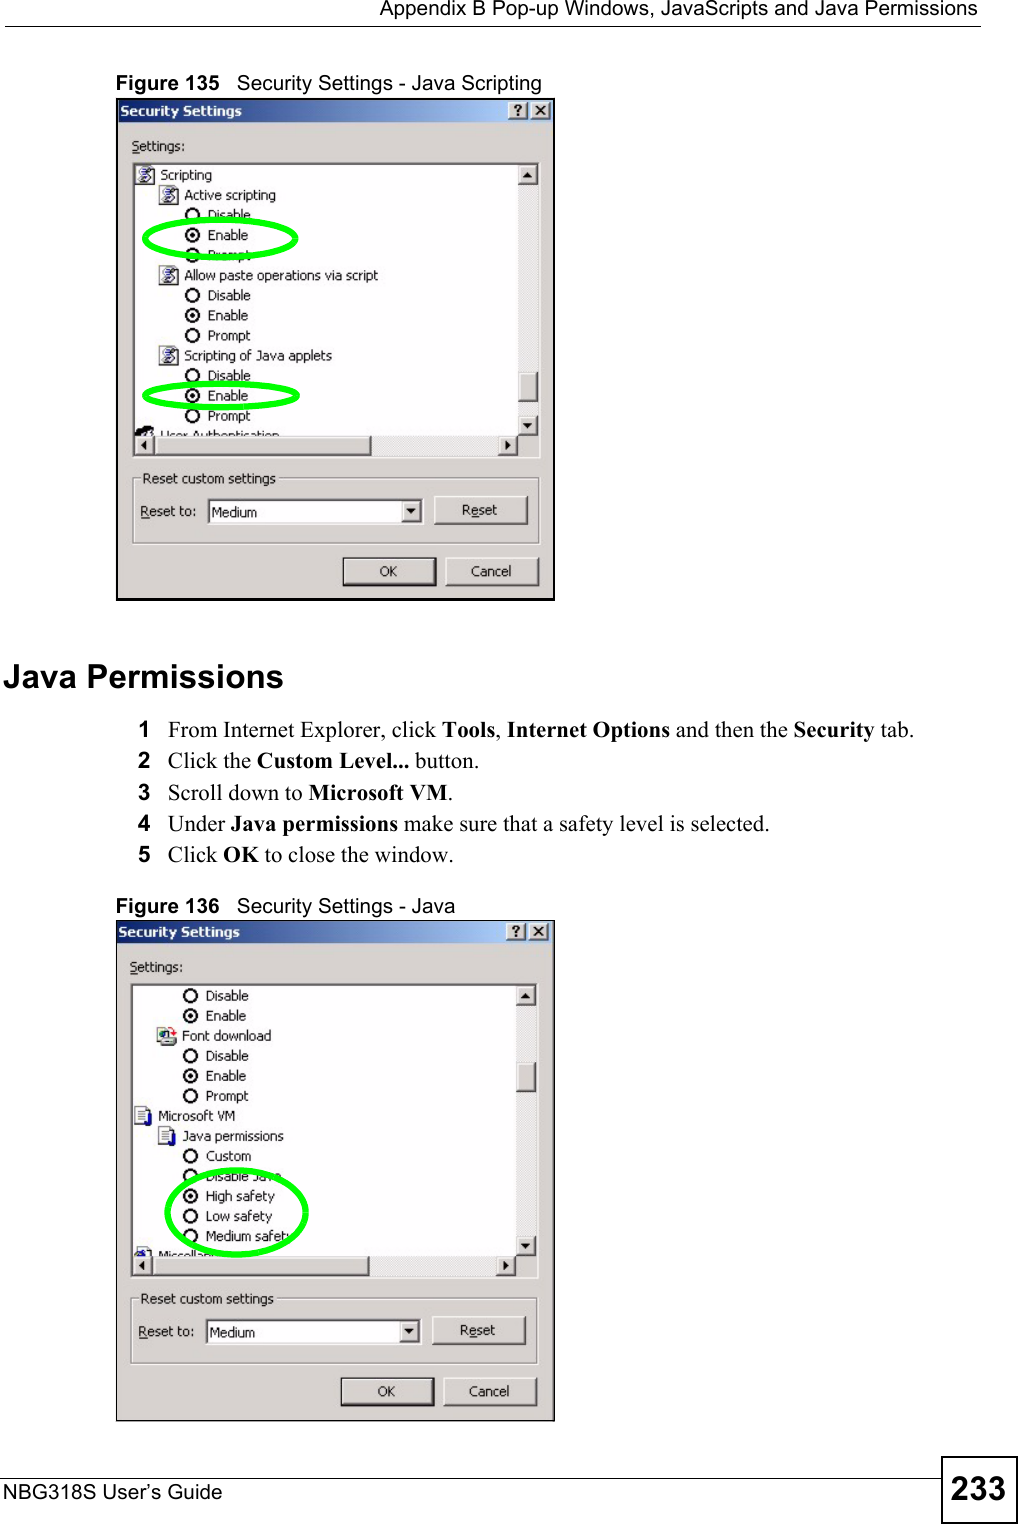  Appendix B Pop-up Windows, JavaScripts and Java PermissionsNBG318S User’s Guide 233Figure 135   Security Settings - Java ScriptingJava Permissions1From Internet Explorer, click Tools, Internet Options and then the Security tab. 2Click the Custom Level... button. 3Scroll down to Microsoft VM. 4Under Java permissions make sure that a safety level is selected.5Click OK to close the window.Figure 136   Security Settings - Java 